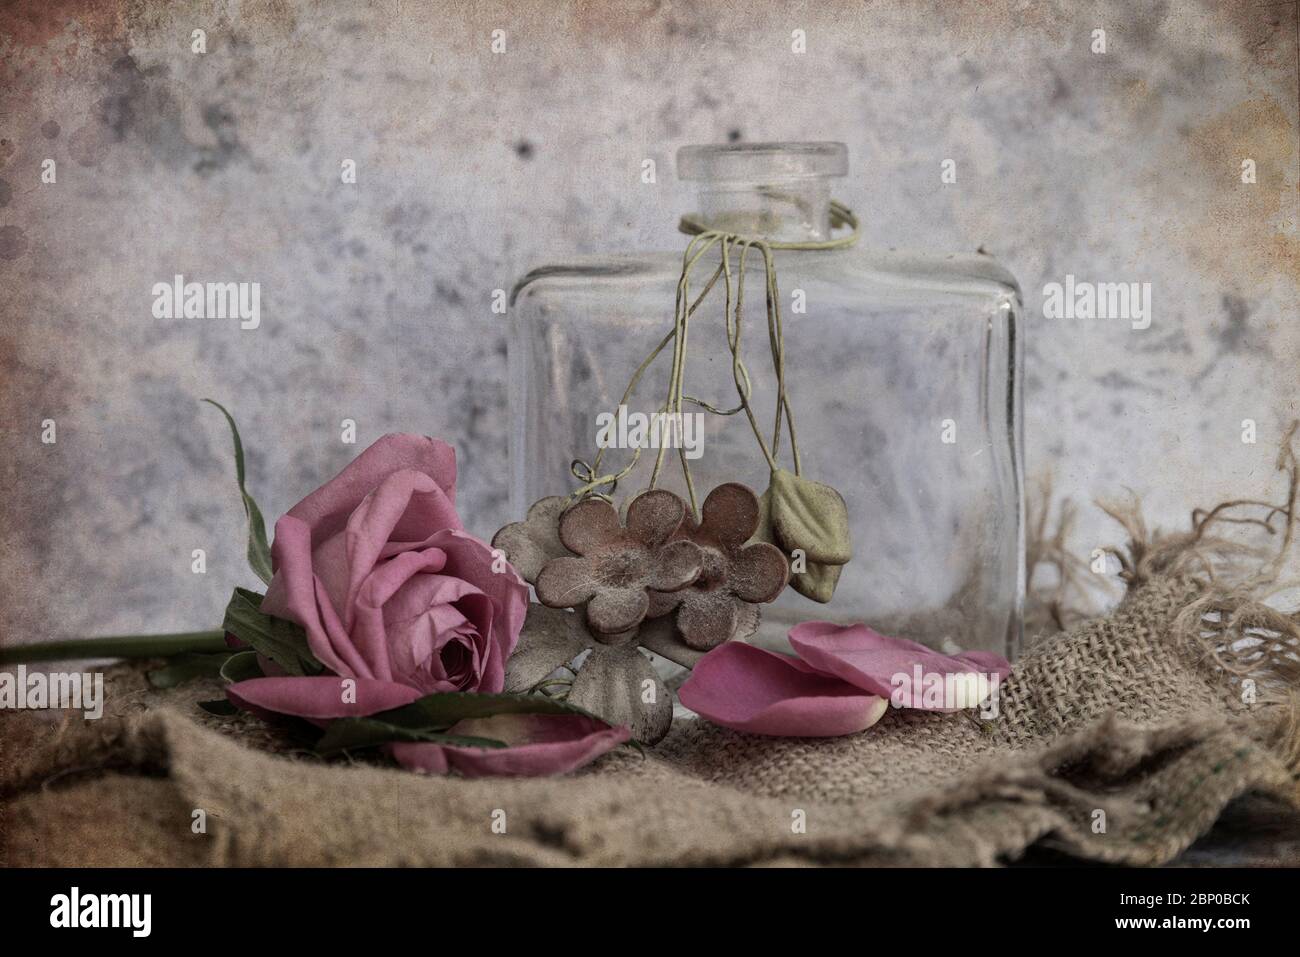 Beautiful vintage look applied to romantic flower and garden paraphenalia still life image with Spring and Summer seasonal blooms Stock Photo